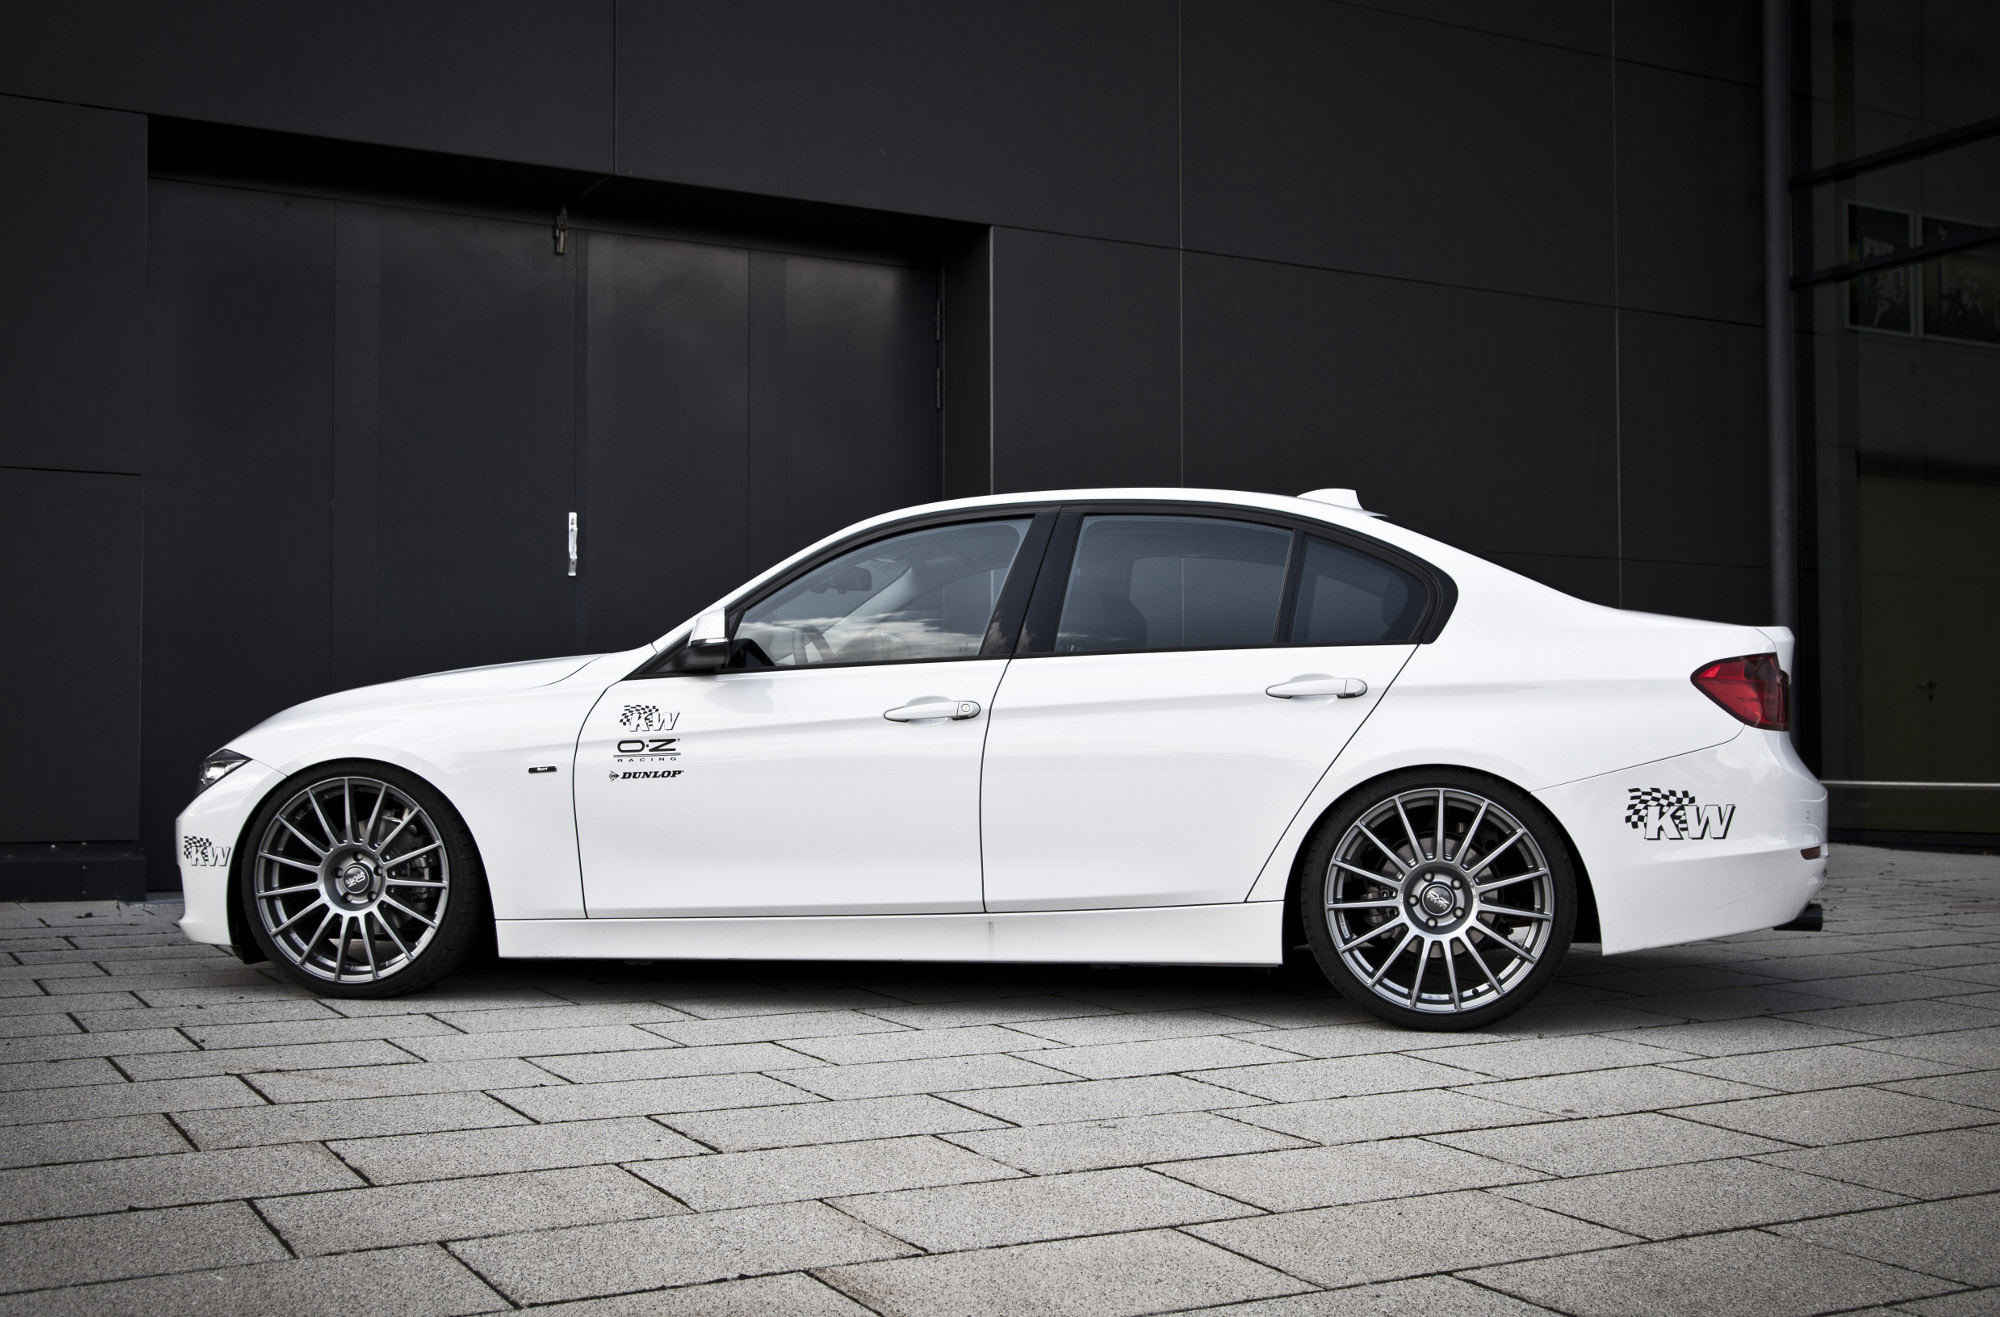 kw, 2012, Bmw, 3 series, F30, Tuning Wallpapers HD